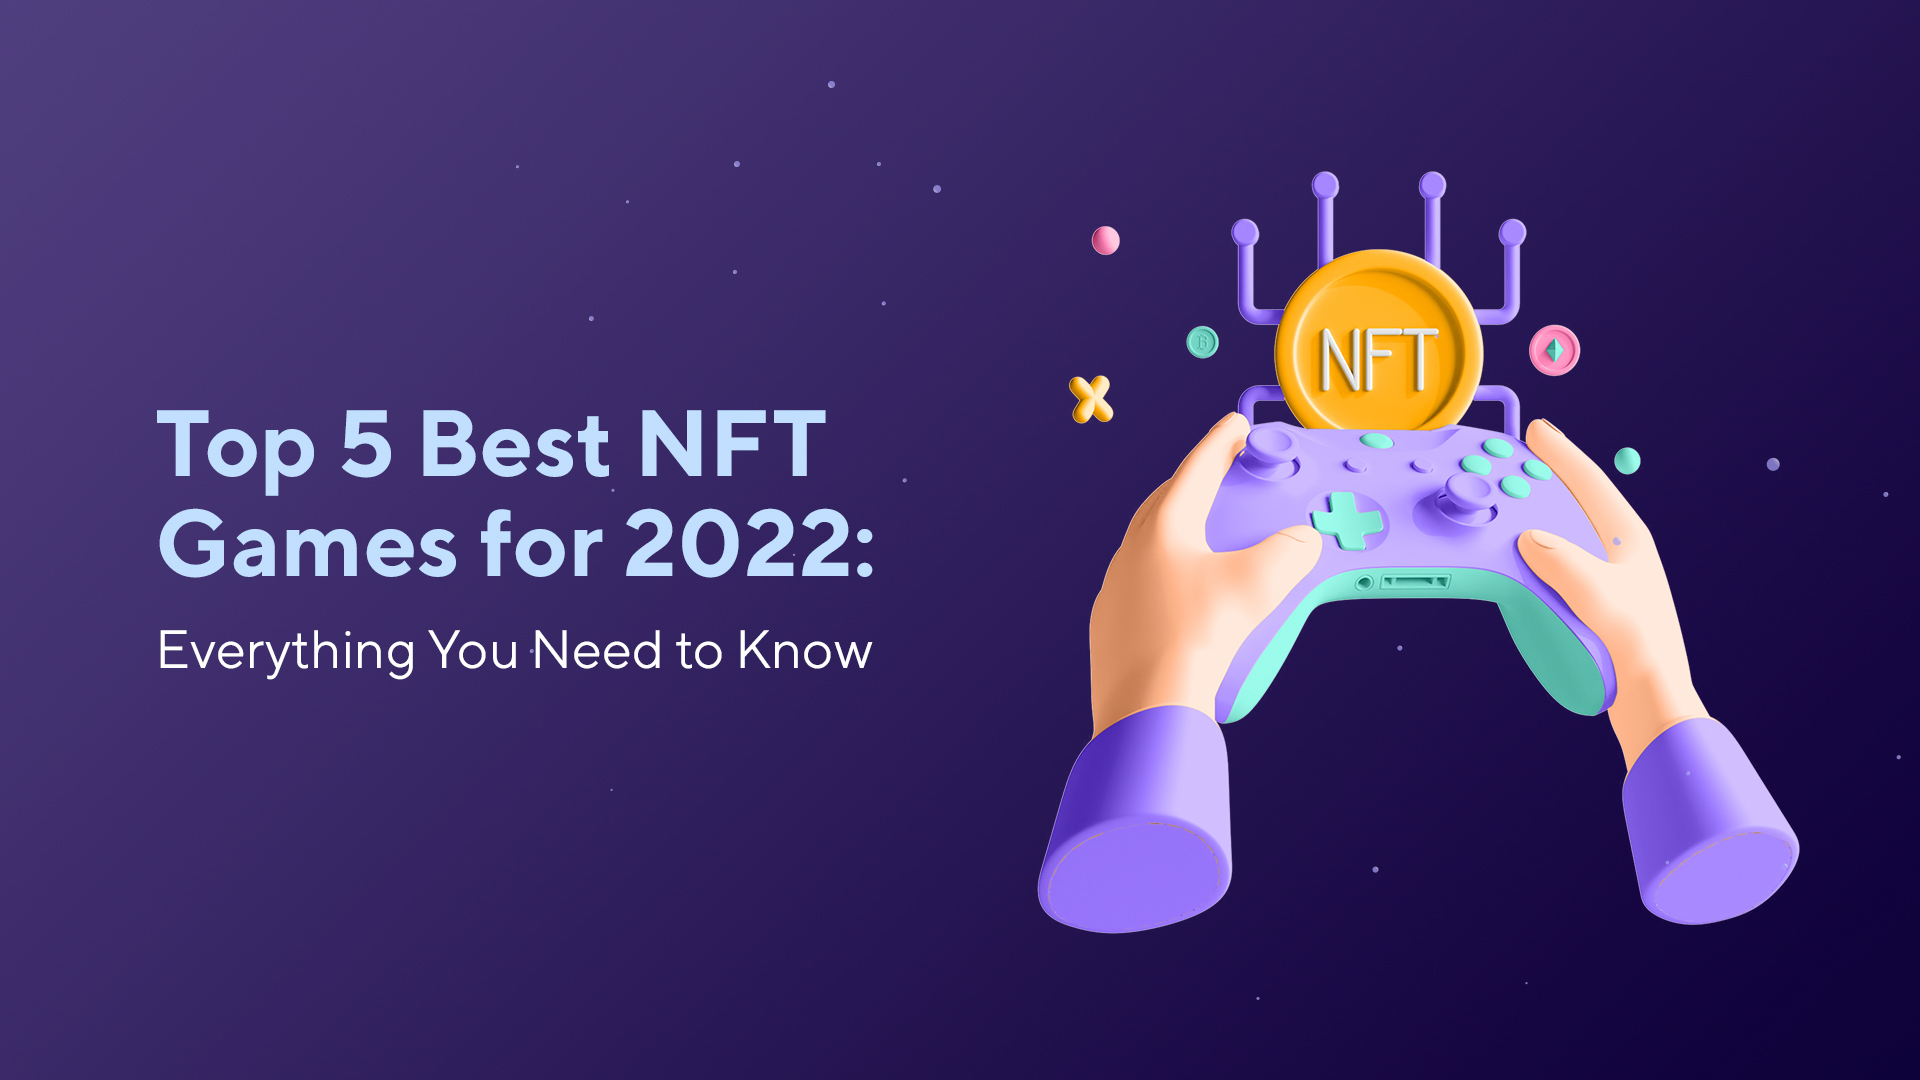 Top 5 Best NFT Games for 2022: Everything You Need to Know